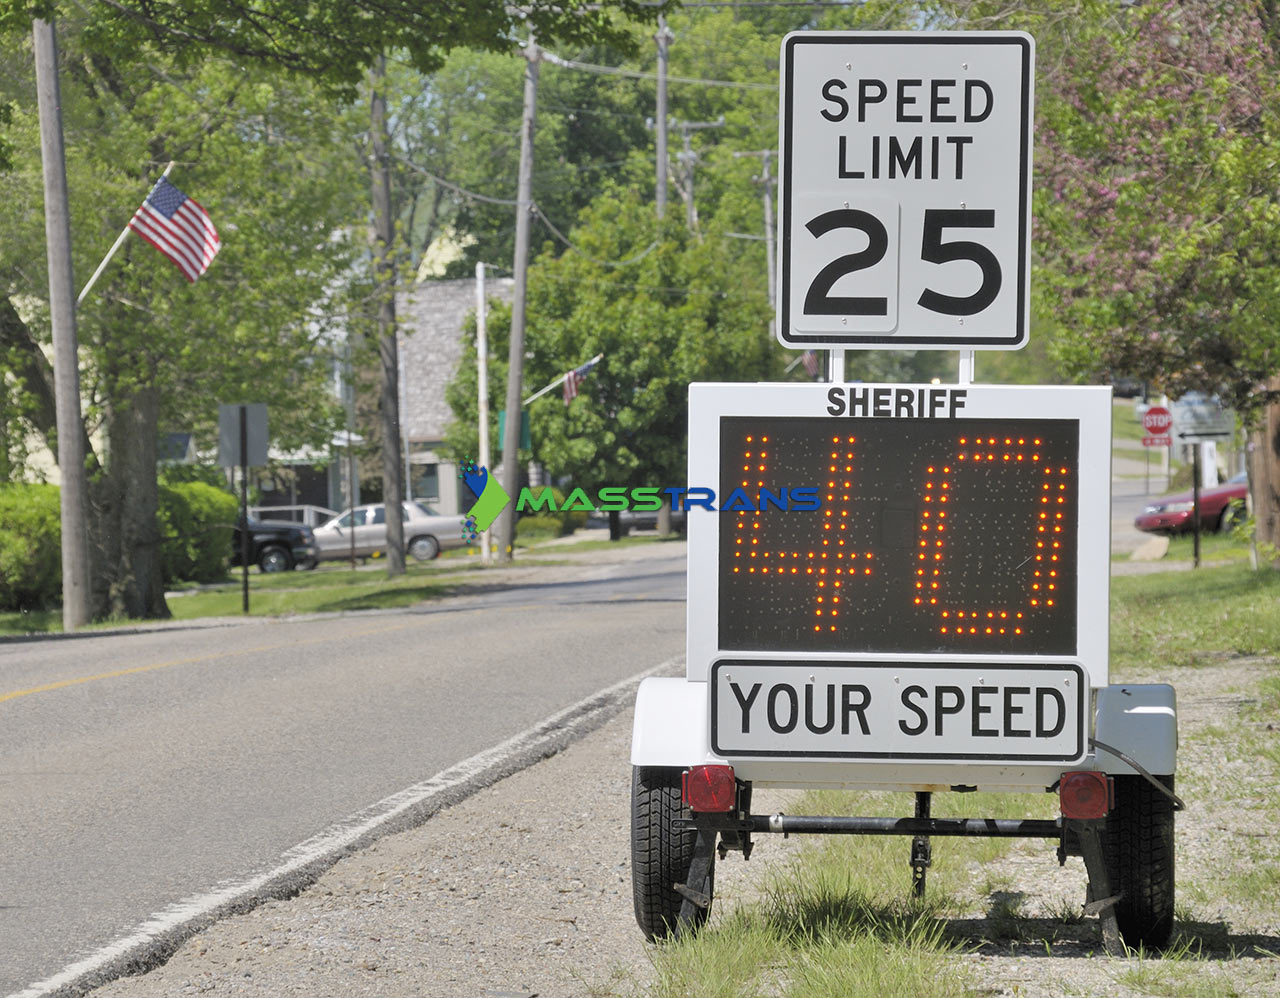 A device measures the speed of cars going too fast.